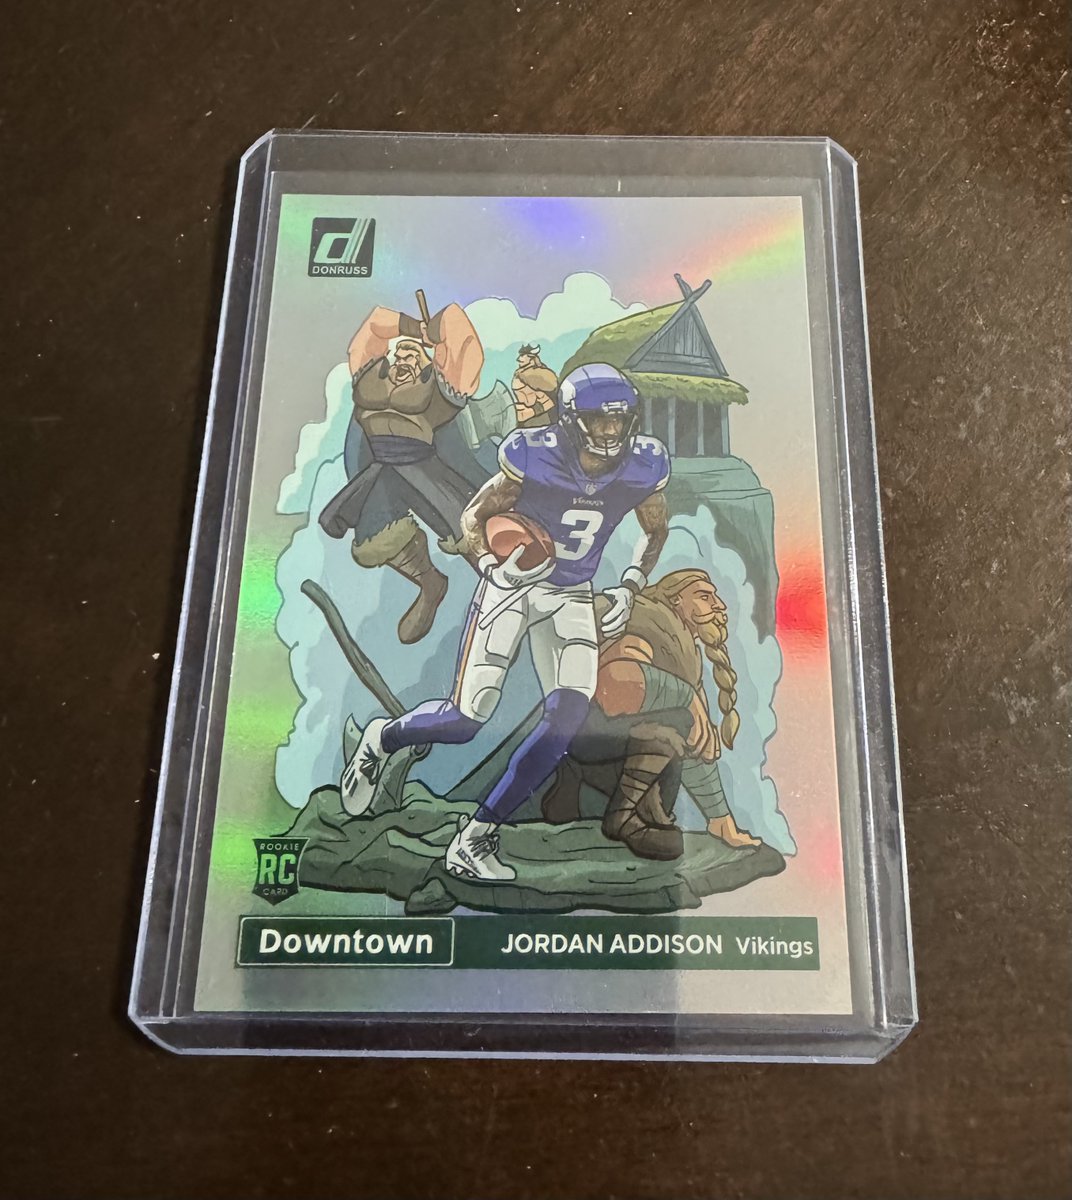 Props to our guy @TheZacBradley who pulled this bad boy in a personal break tonight!!
#DonrussDowntown #JordanAddison #NFLCards #tradingcards #sportscards #CardCollecting #footballcards #NFLMemorabilia #RookieCards #CollectibleCards #Vikings @PaniniAmerica  @Espn_Jordan  #breaks